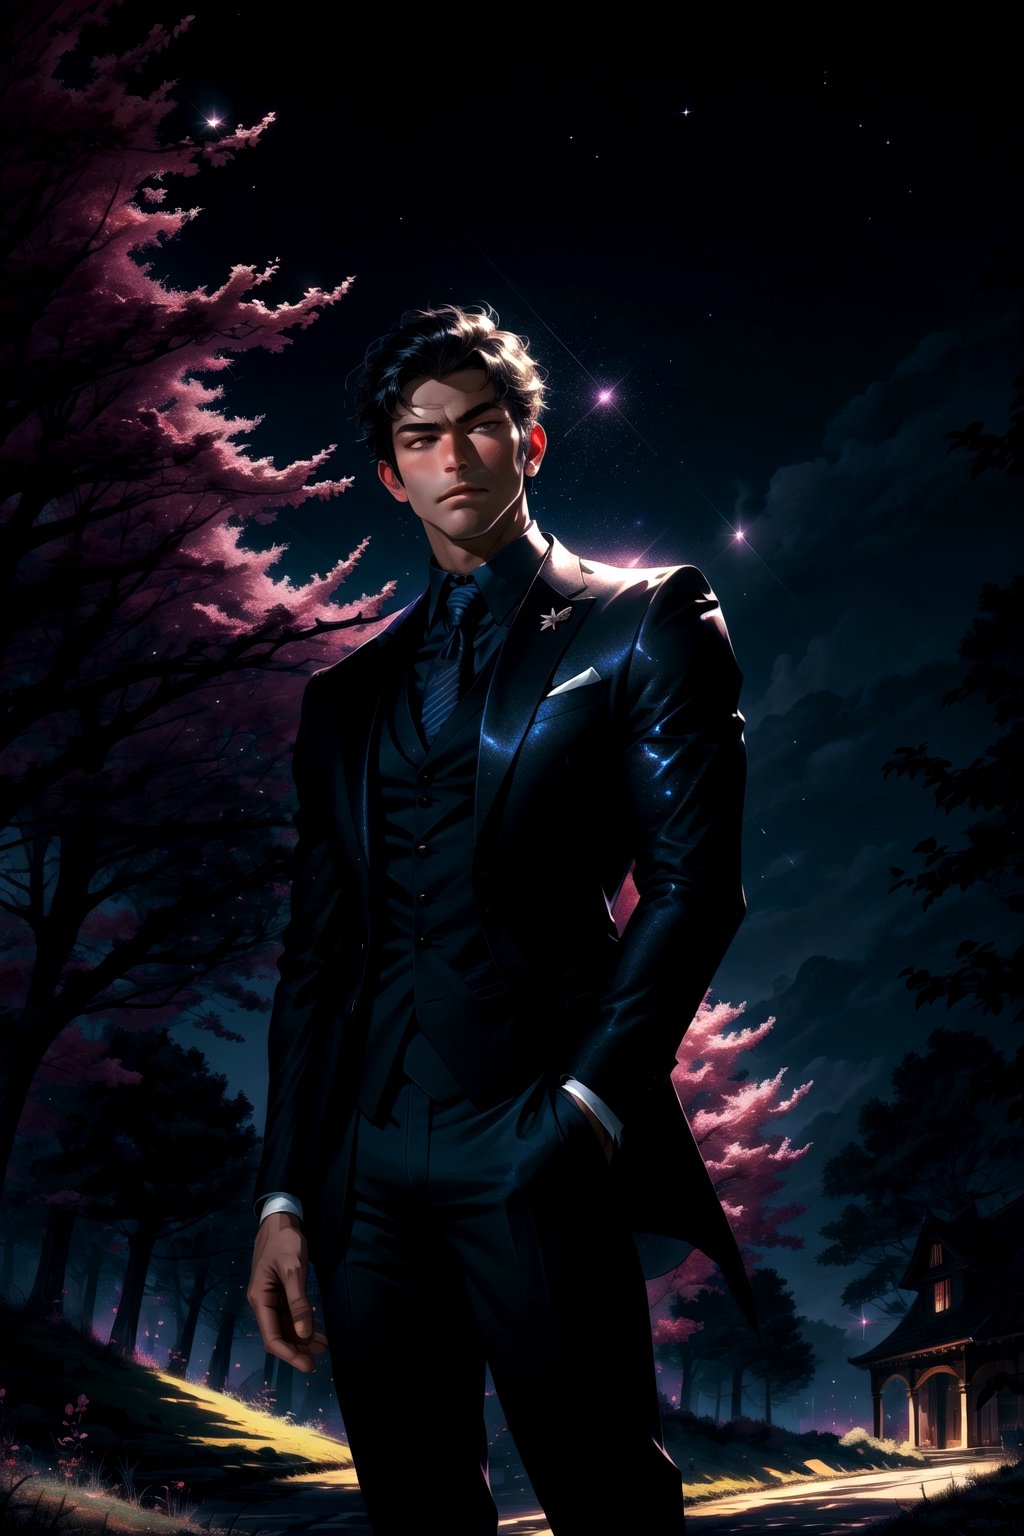 1 boy, serious look, night, mansion background with night trees, black suit with glitter, mix of fantasy and realism, ultra hd, hdr, 4k